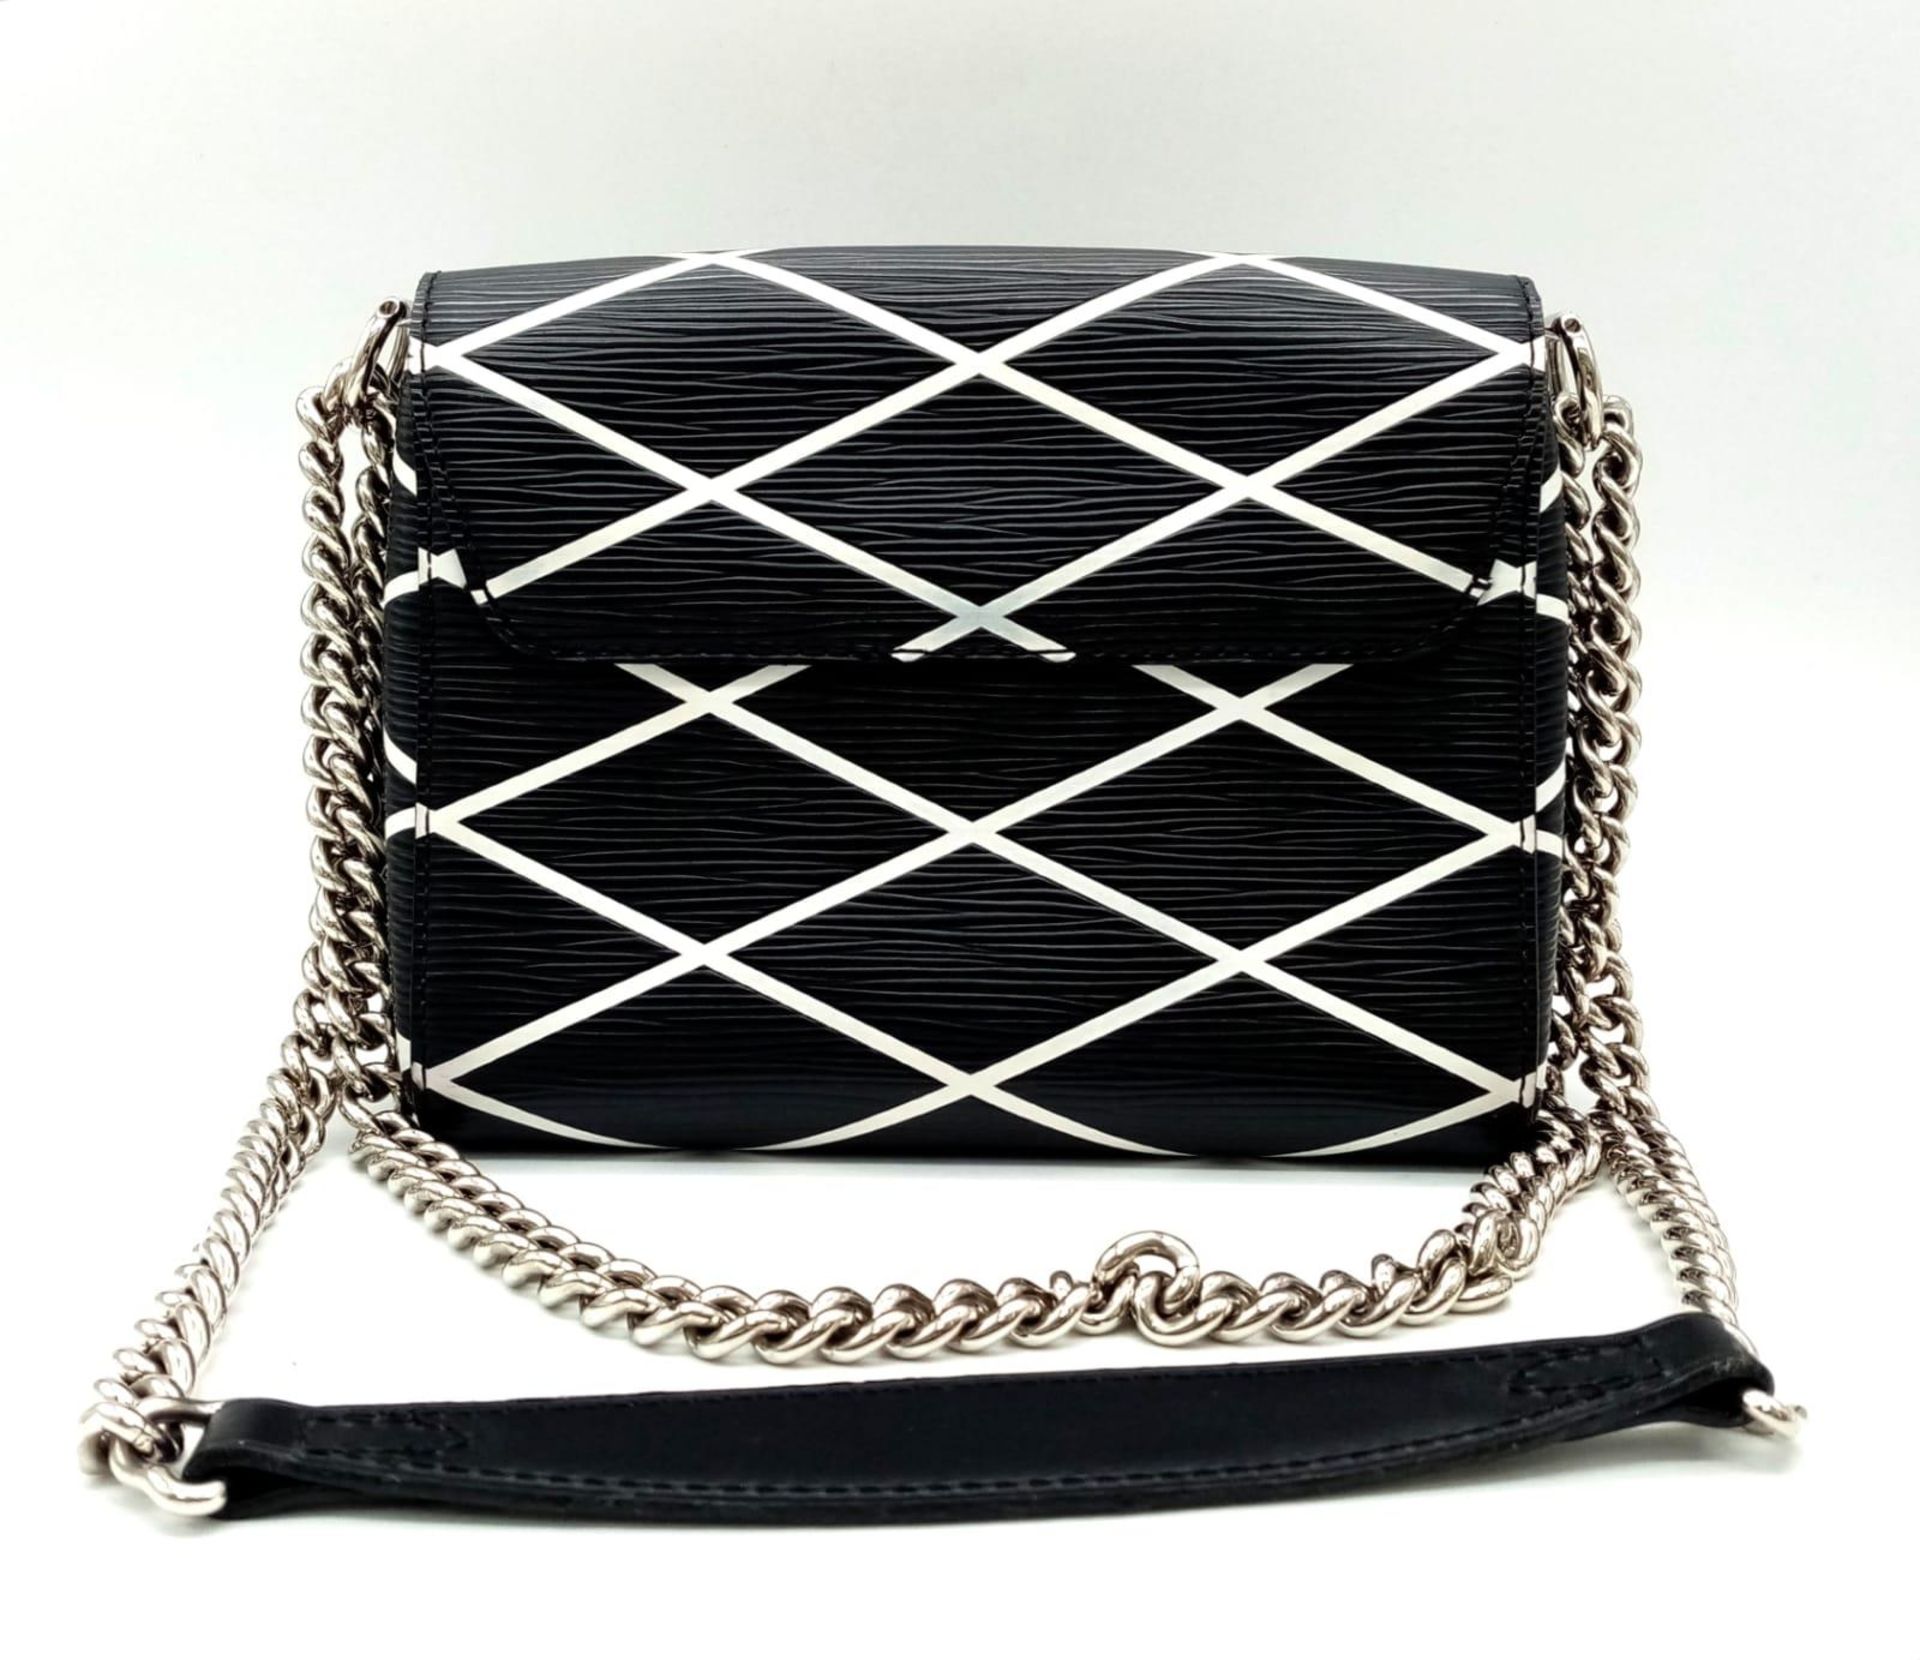 A Louis Vuitton Twist Shoulder Bag in Black Epi Leather with White Diamond Pattern, Silver Coloured - Image 3 of 9